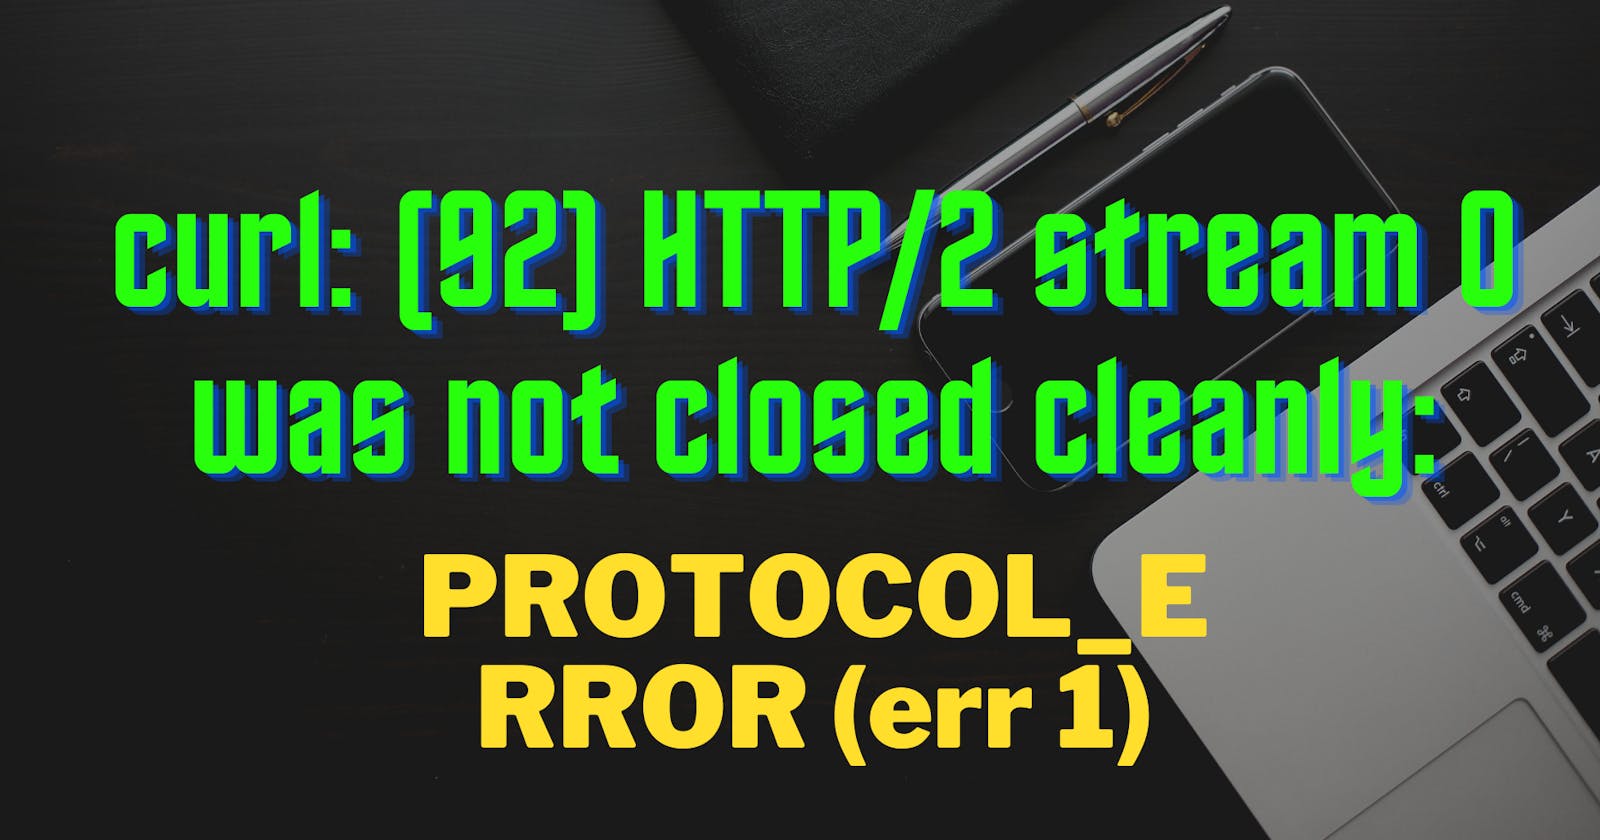 curl: (92) HTTP/2 stream 0 was not closed cleanly: PROTOCOL_ERROR (err 1)